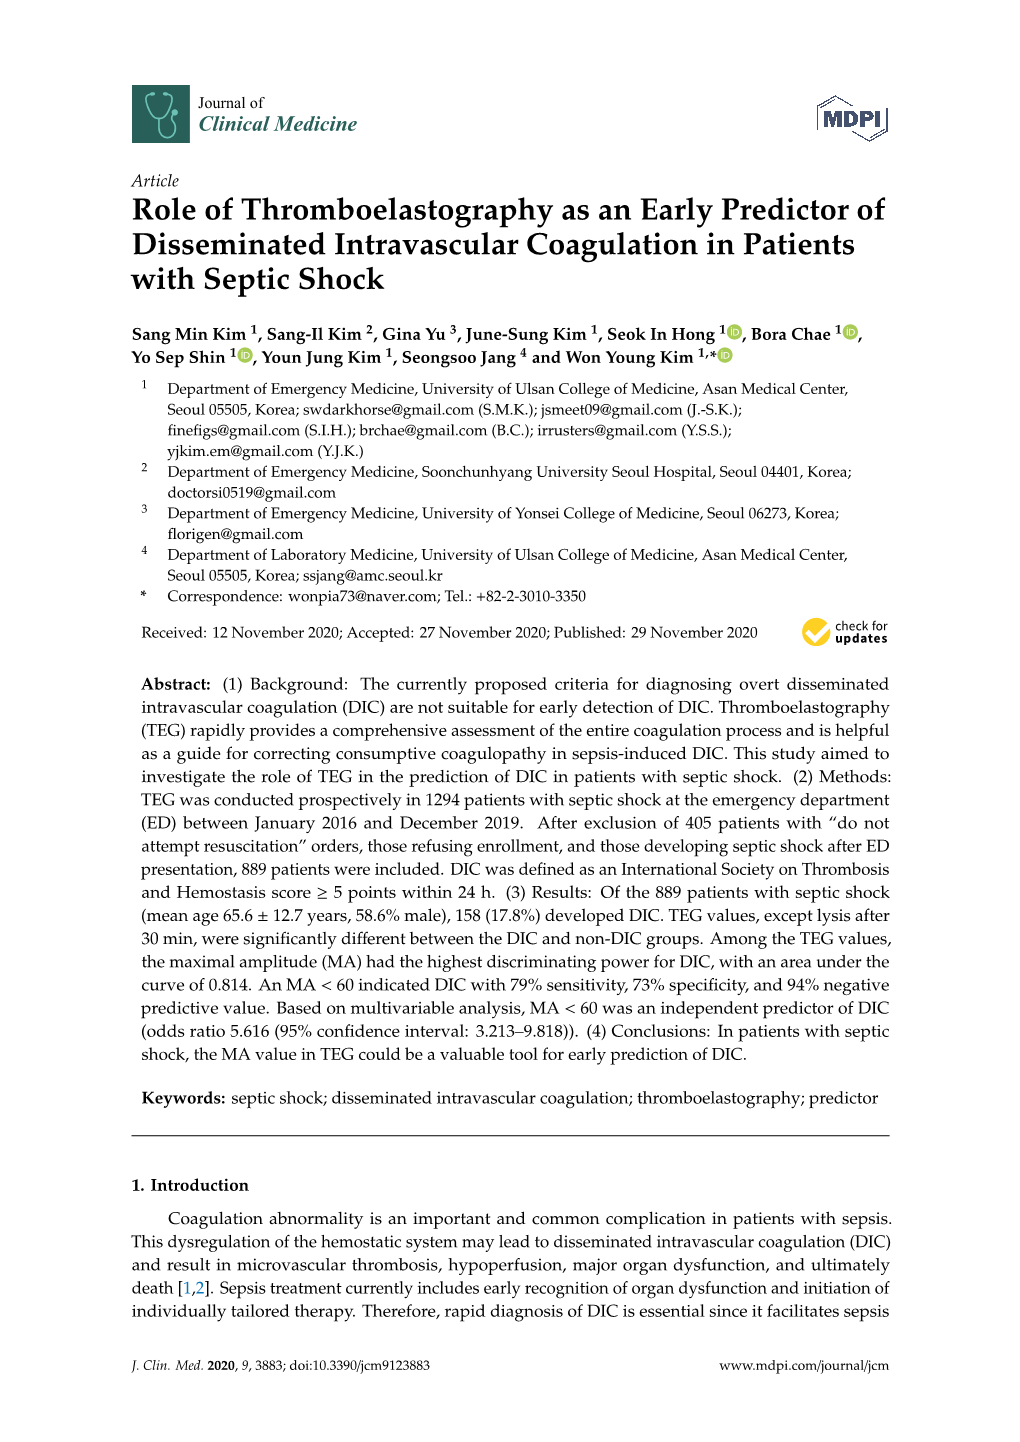 Role of Thromboelastography As an Early Predictor of Disseminated Intravascular Coagulation in Patients with Septic Shock